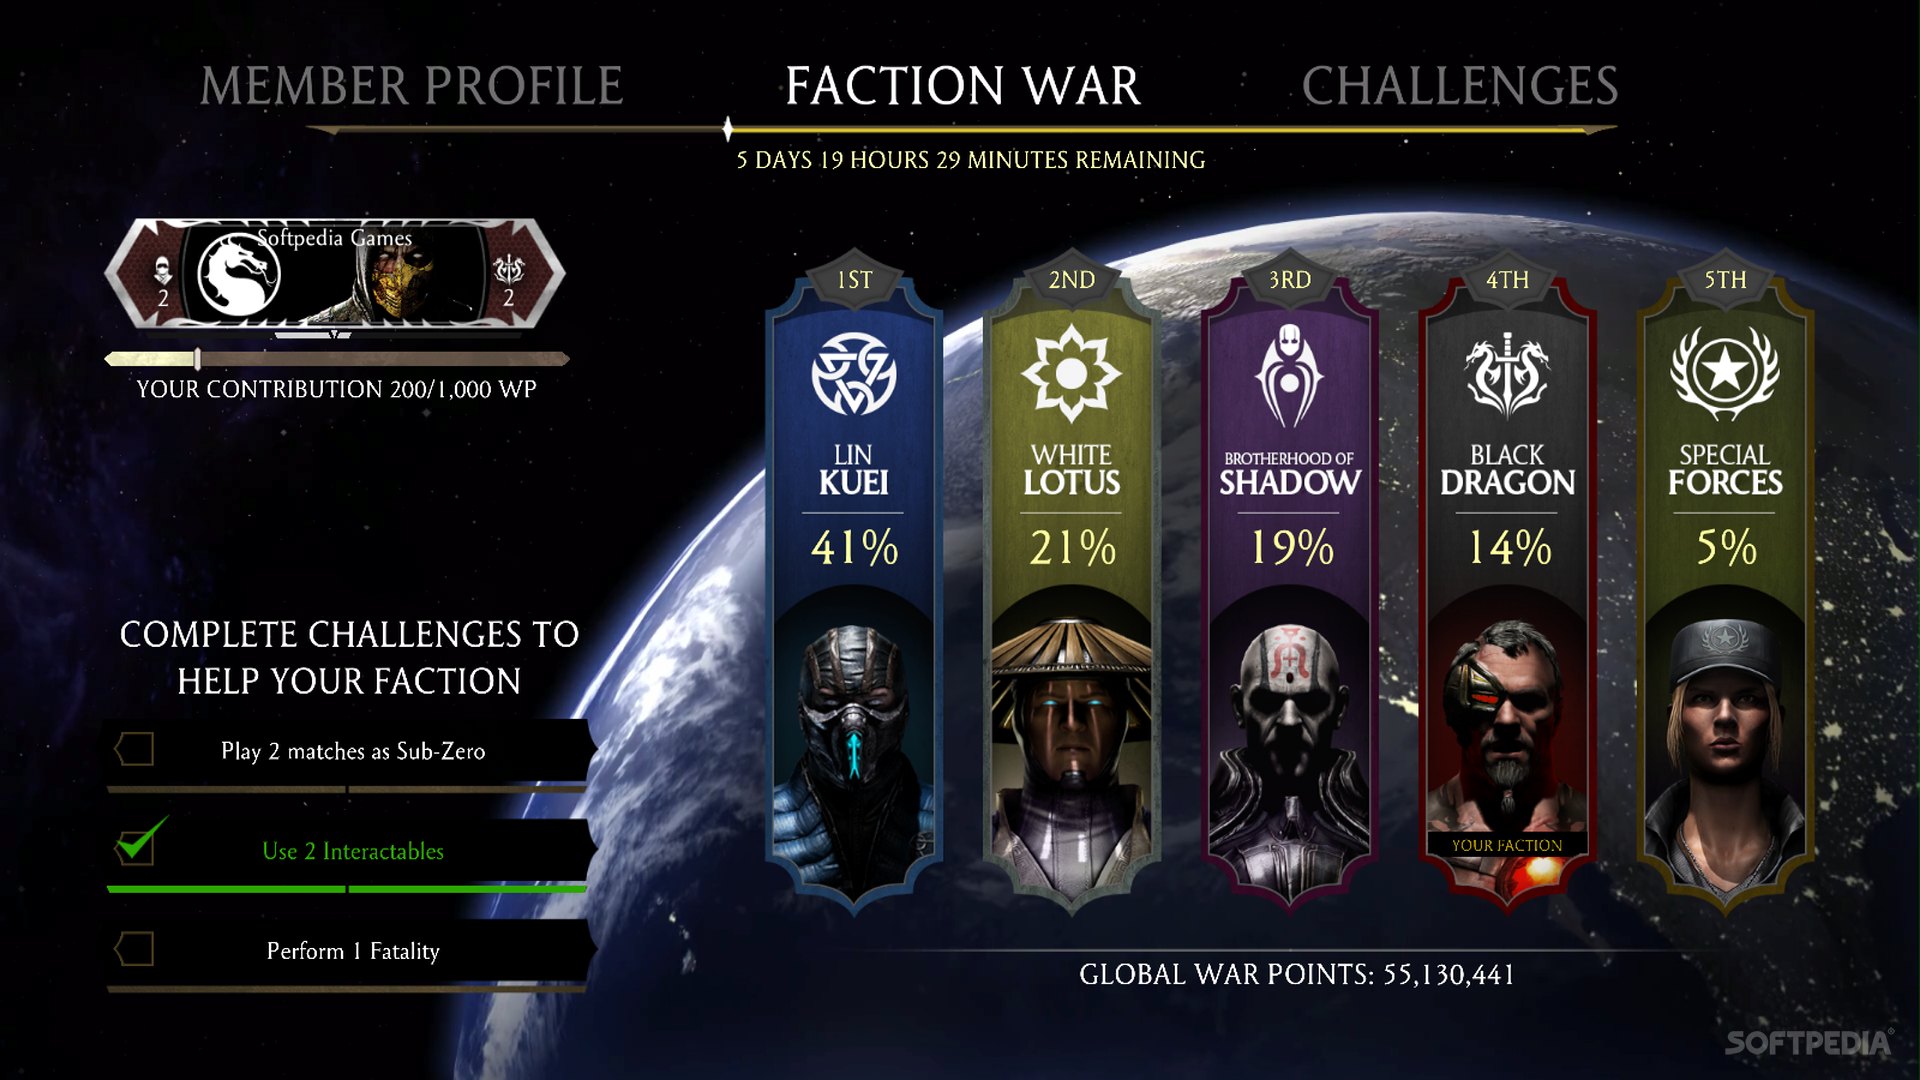 Mortal Kombat X Nails the Balance Between Innovation and Old Features